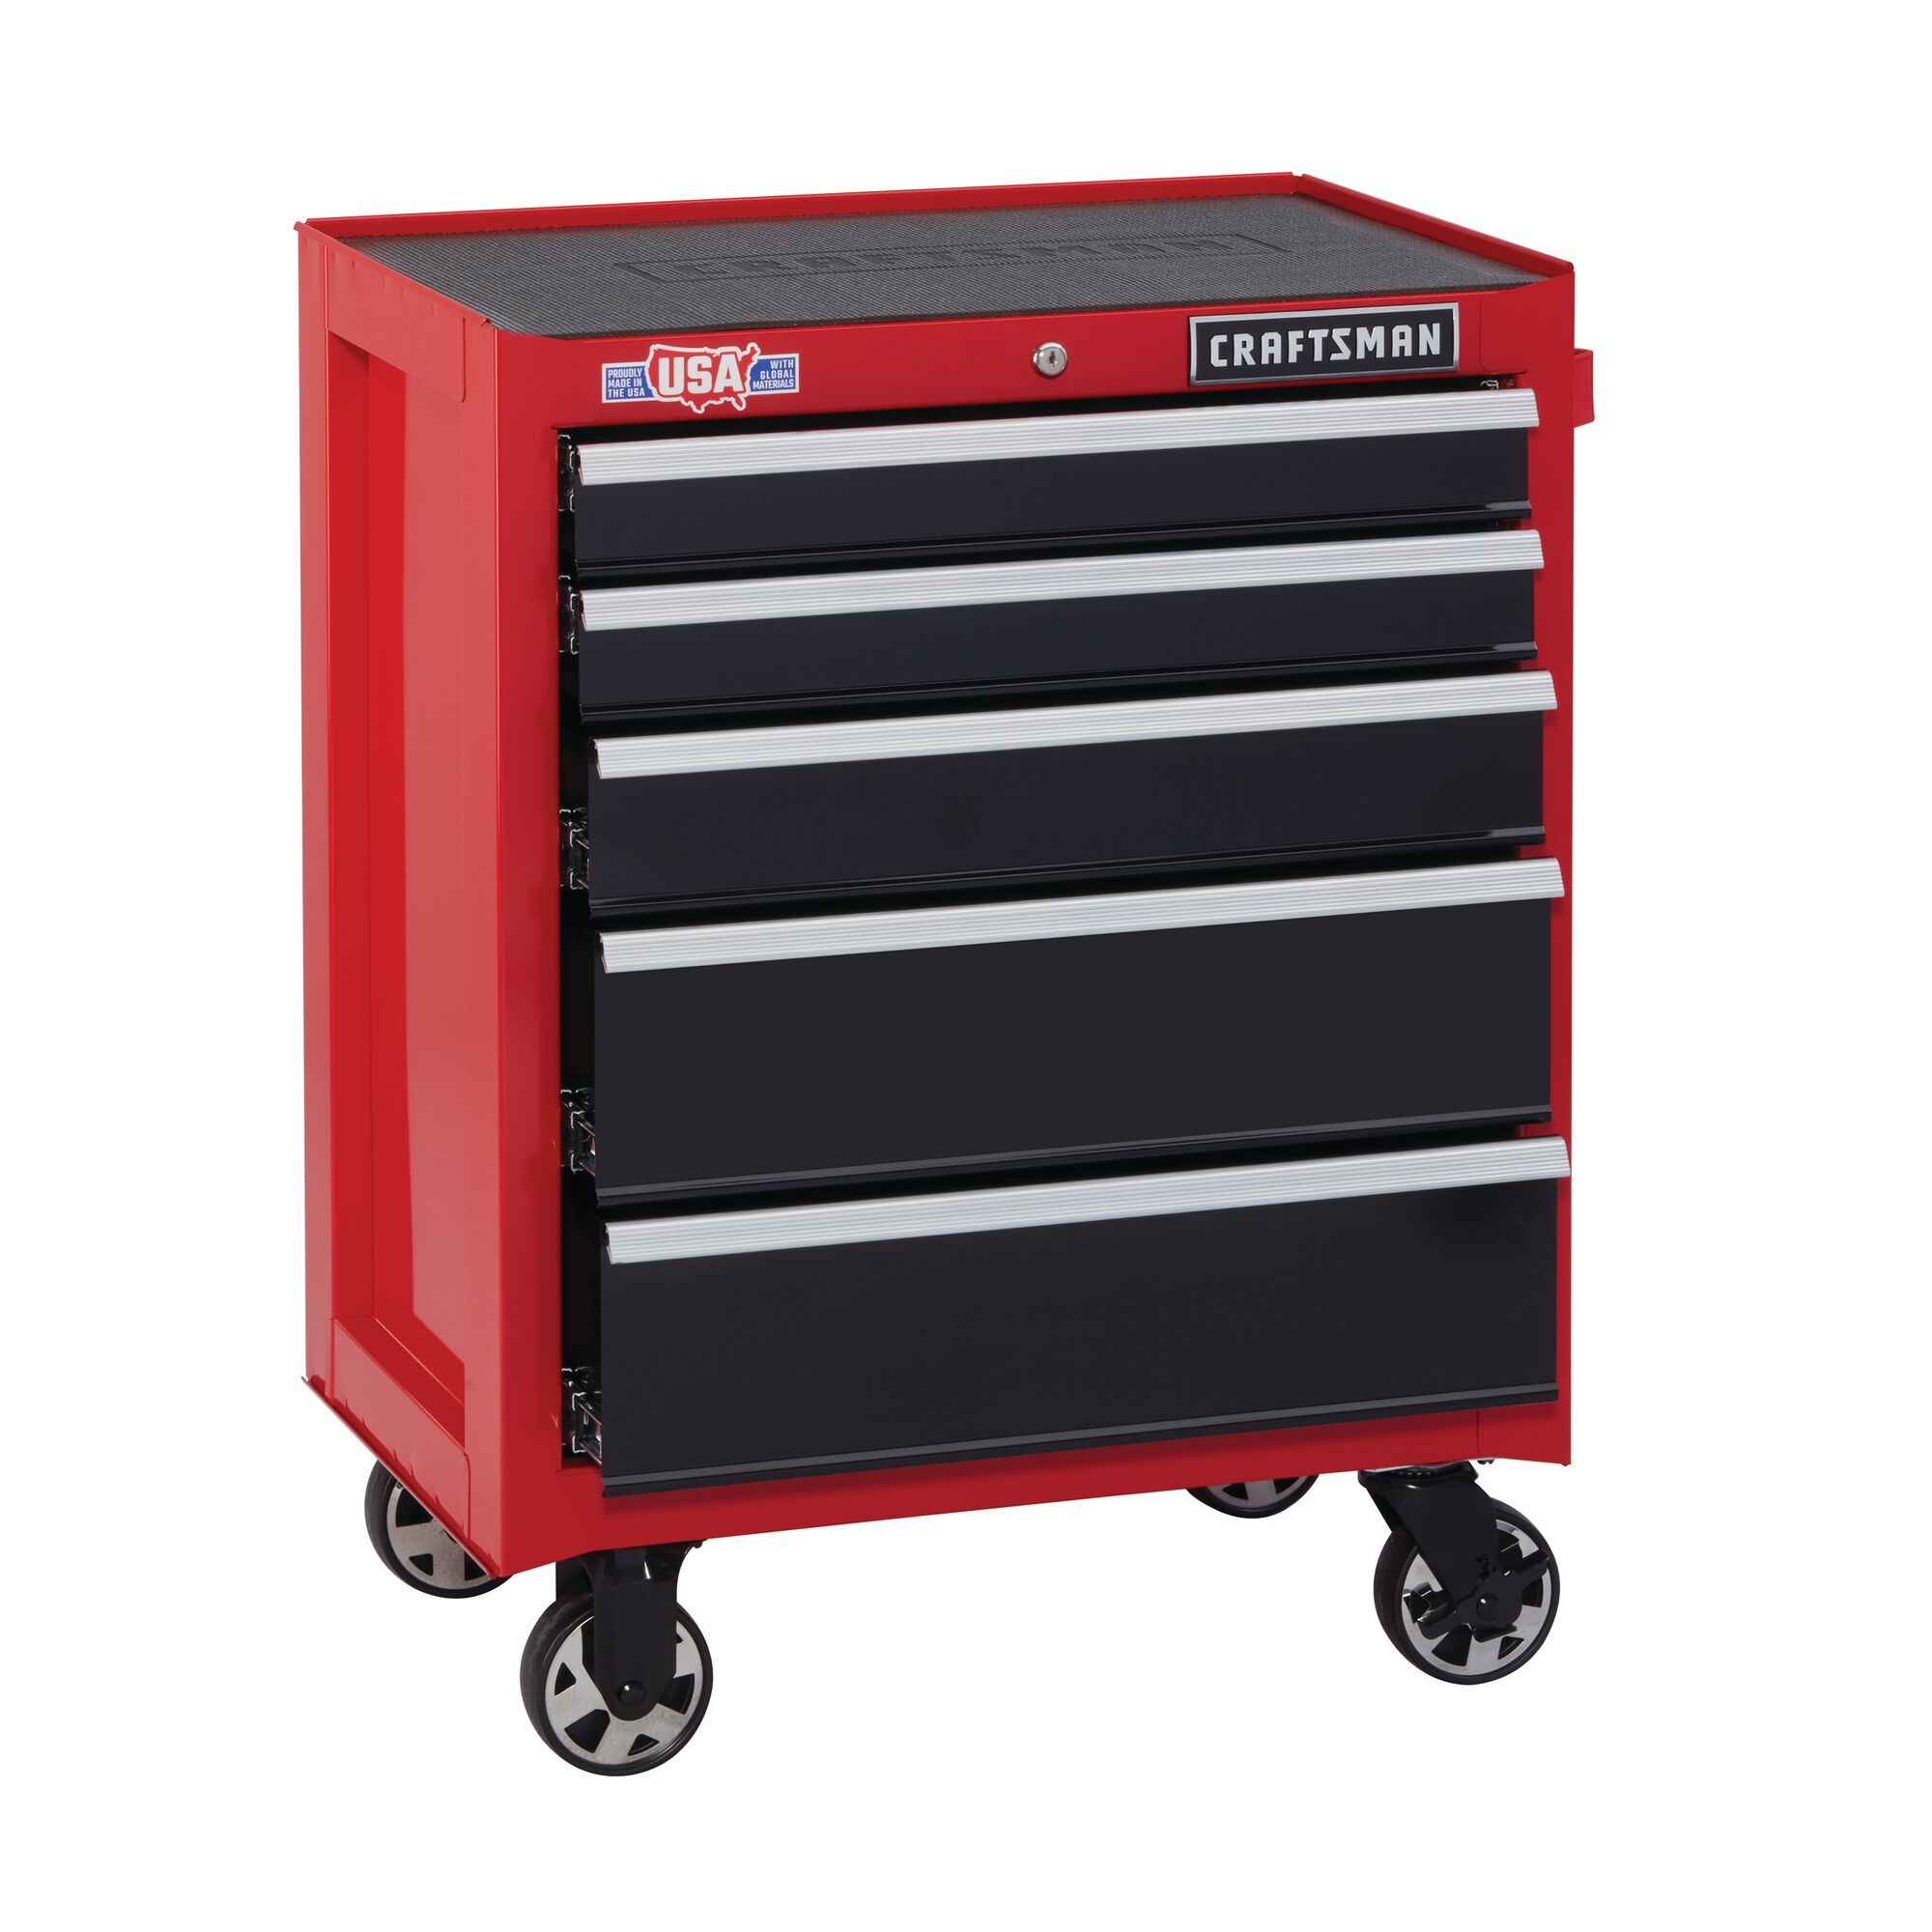 CRAFTSMAN 2000 Series 26.5-in W x 34-in H 5-Drawer Steel Rolling Tool  Cabinet (Red)